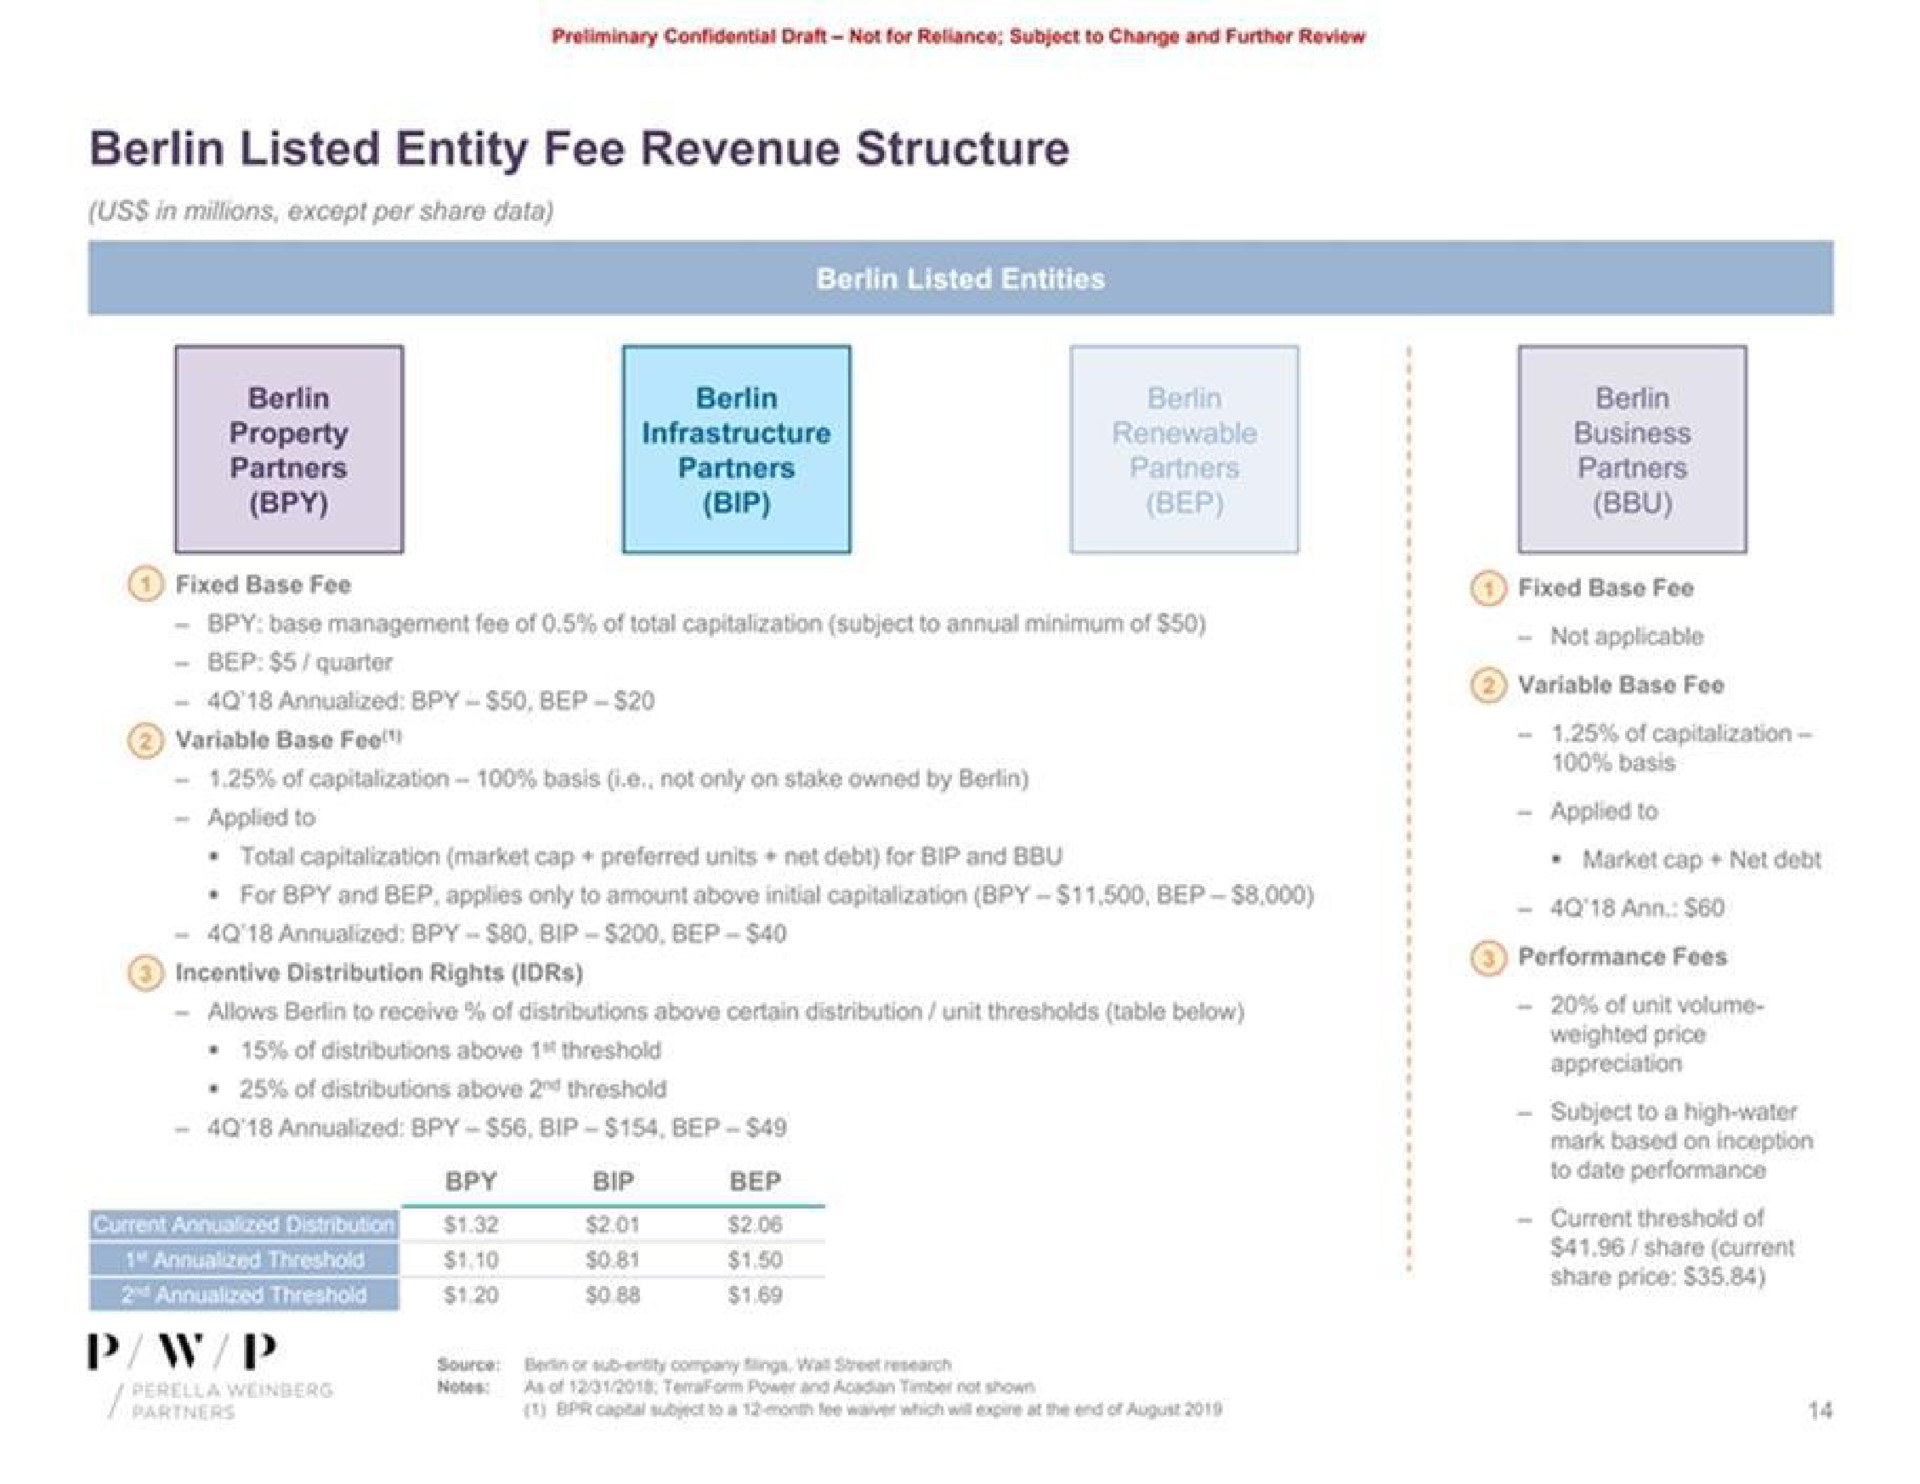 confidential draft not for reliance subject to change and further review berlin listed entity fee revenue structure fixed base fee incentive distribution rights variable base fee applied to weighted price | Perella Weinberg Partners